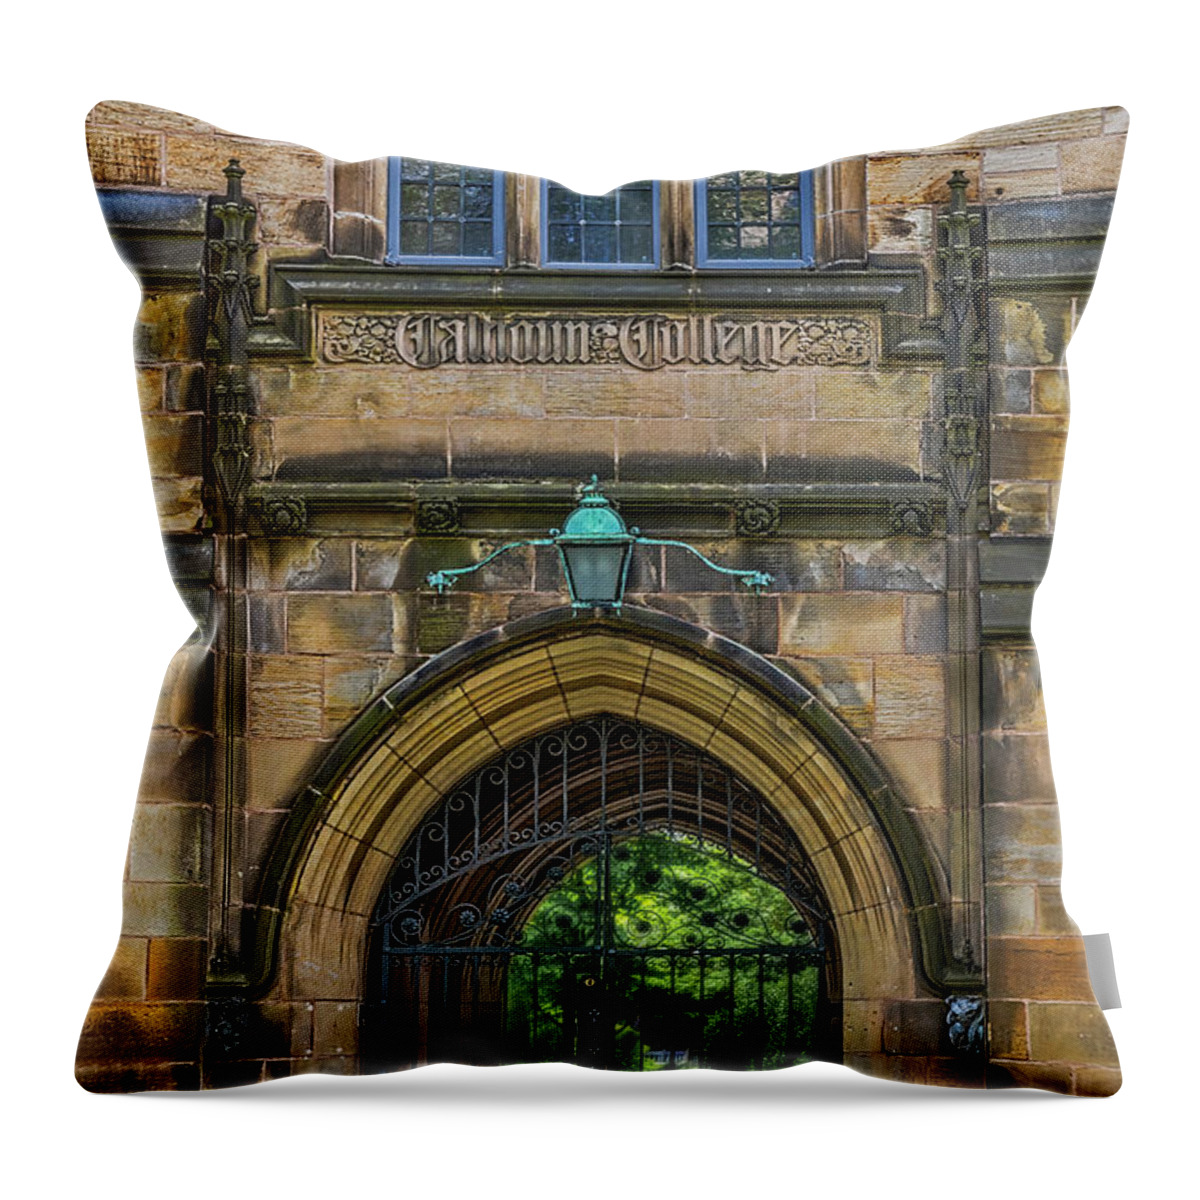 Yale University Throw Pillow featuring the photograph Yale Calhoun College by Susan Candelario